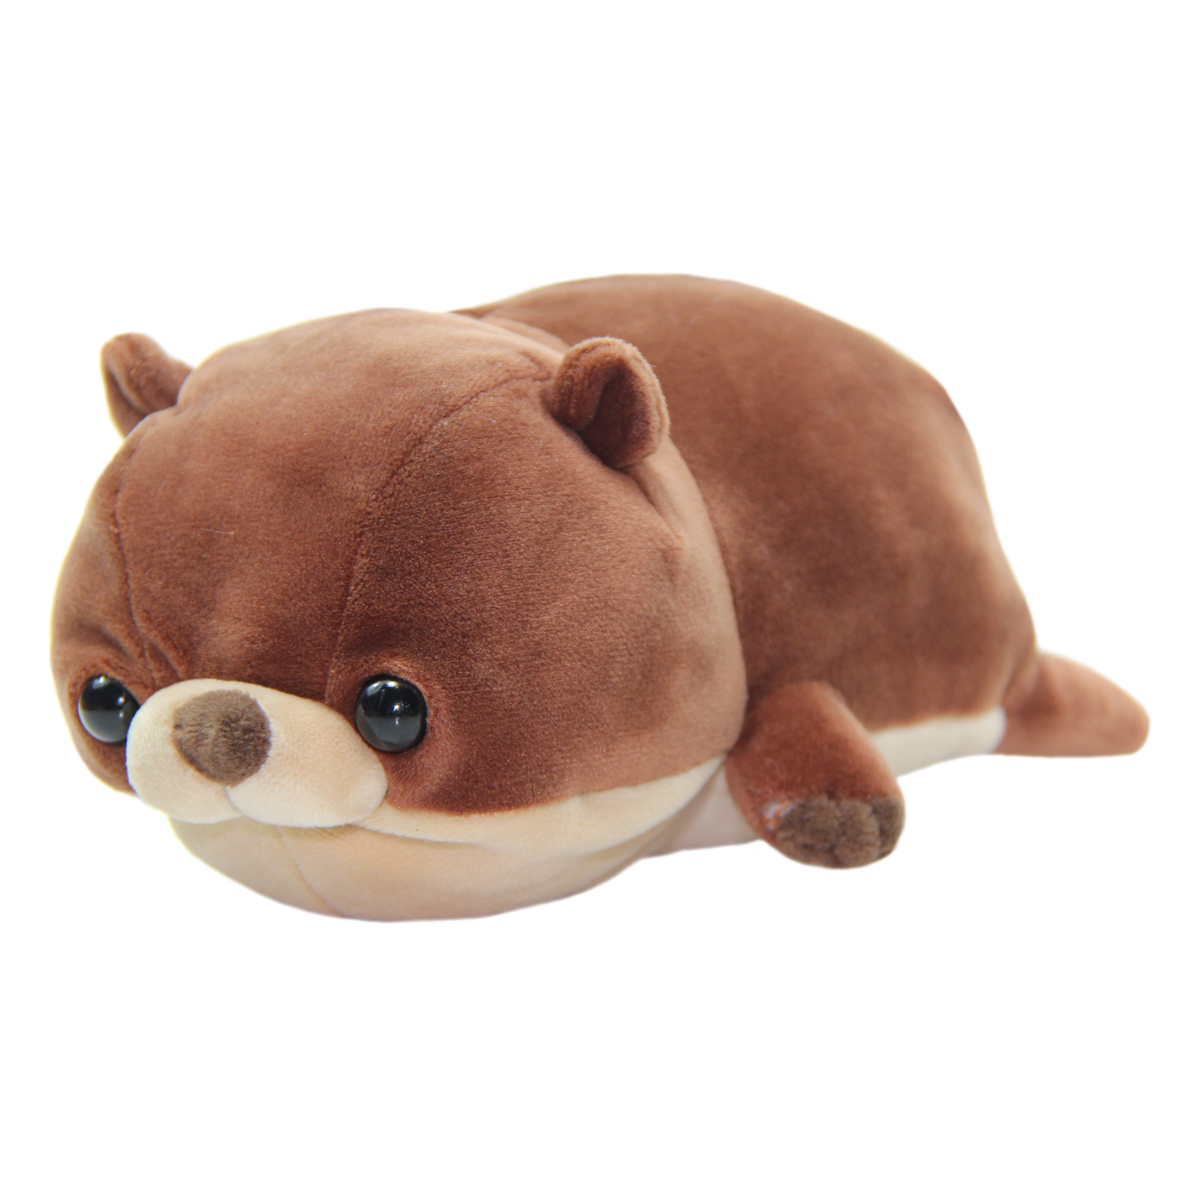 Mochi Puni Kawauso Collection Super Soft Otter Plush Toy Brown 8 Inches